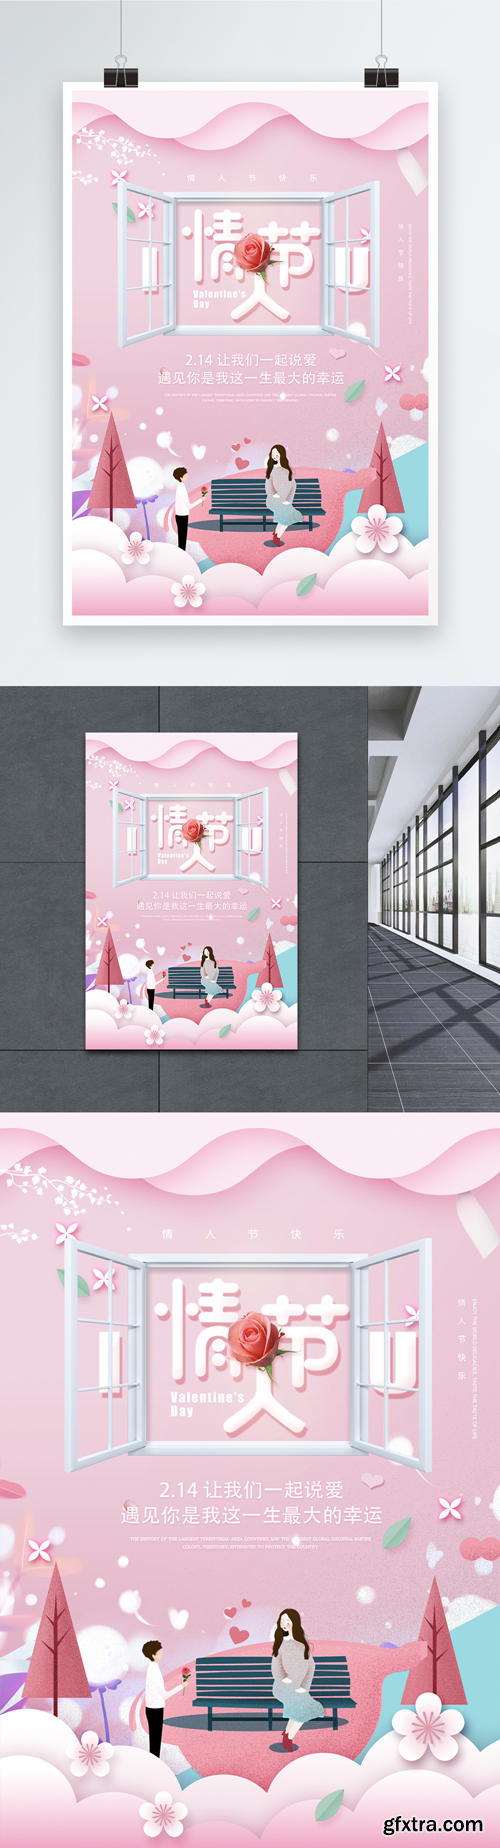 paper cut style pink valentines day posters